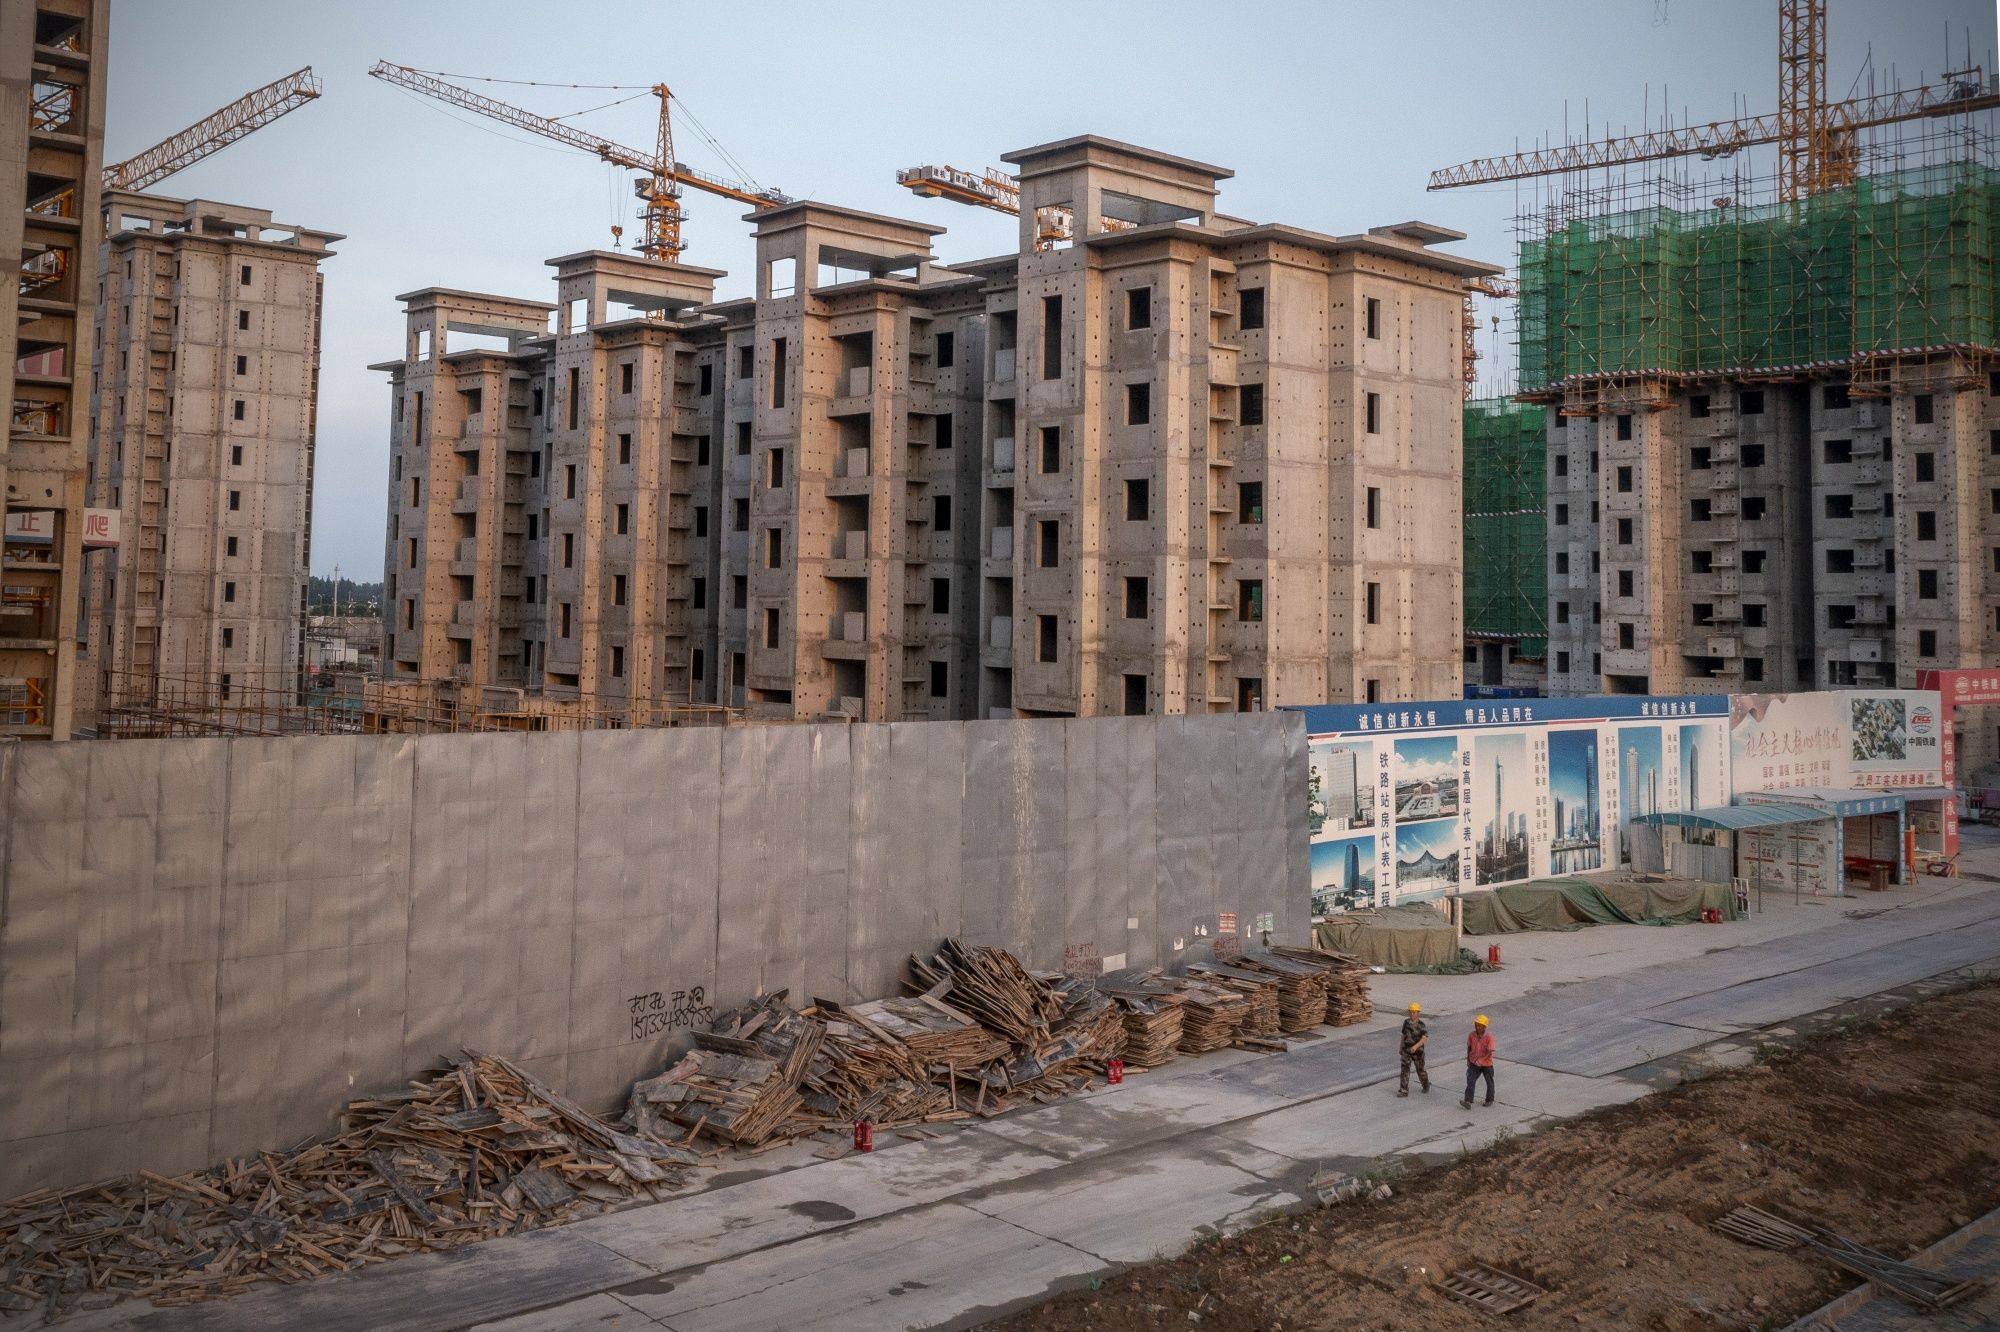 Workers leave the China Evergrande Group Royal Peak residential development under construction in Beijing on July 29, 2022. Photo: Bloomberg